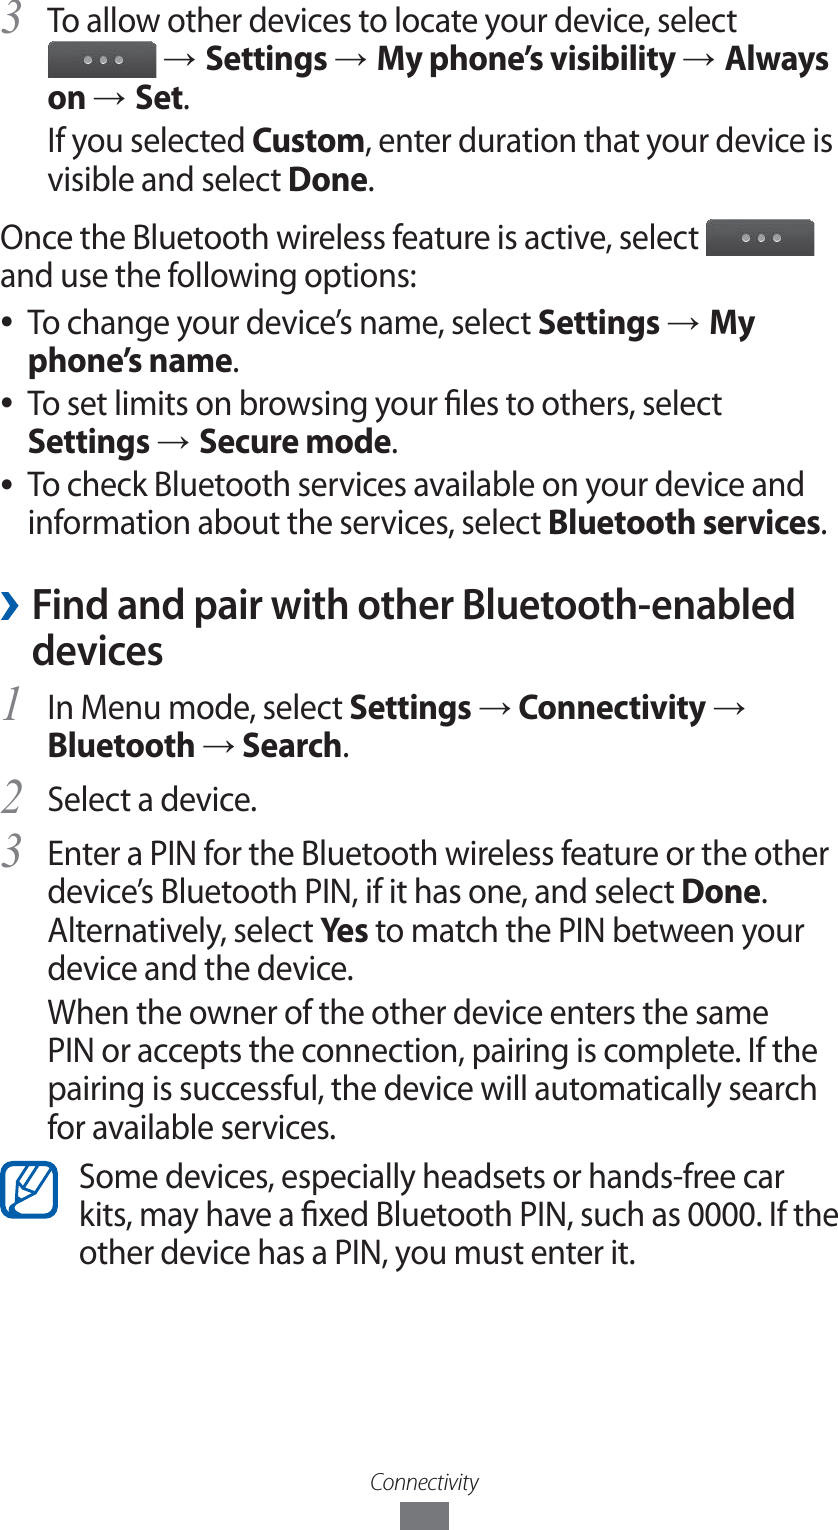 ConnectivityTo allow other devices to locate your device, select 3  → Settings → My phone’s visibility → Always on → Set.If you selected Custom, enter duration that your device is visible and select Done.Once the Bluetooth wireless feature is active, select   and use the following options:To change your device’s name, select  ●Settings → My phone’s name.To set limits on browsing your les to others, select ● Settings → Secure mode.To check Bluetooth services available on your device and  ●information about the services, select Bluetooth services. ›Find and pair with other Bluetooth-enabled devicesIn Menu mode, select 1 Settings → Connectivity → Bluetooth → Search.Select a device.2 Enter a PIN for the Bluetooth wireless feature or the other 3 device’s Bluetooth PIN, if it has one, and select Done. Alternatively, select Yes to match the PIN between your device and the device.When the owner of the other device enters the same PIN or accepts the connection, pairing is complete. If the pairing is successful, the device will automatically search for available services.Some devices, especially headsets or hands-free car kits, may have a xed Bluetooth PIN, such as 0000. If the other device has a PIN, you must enter it.